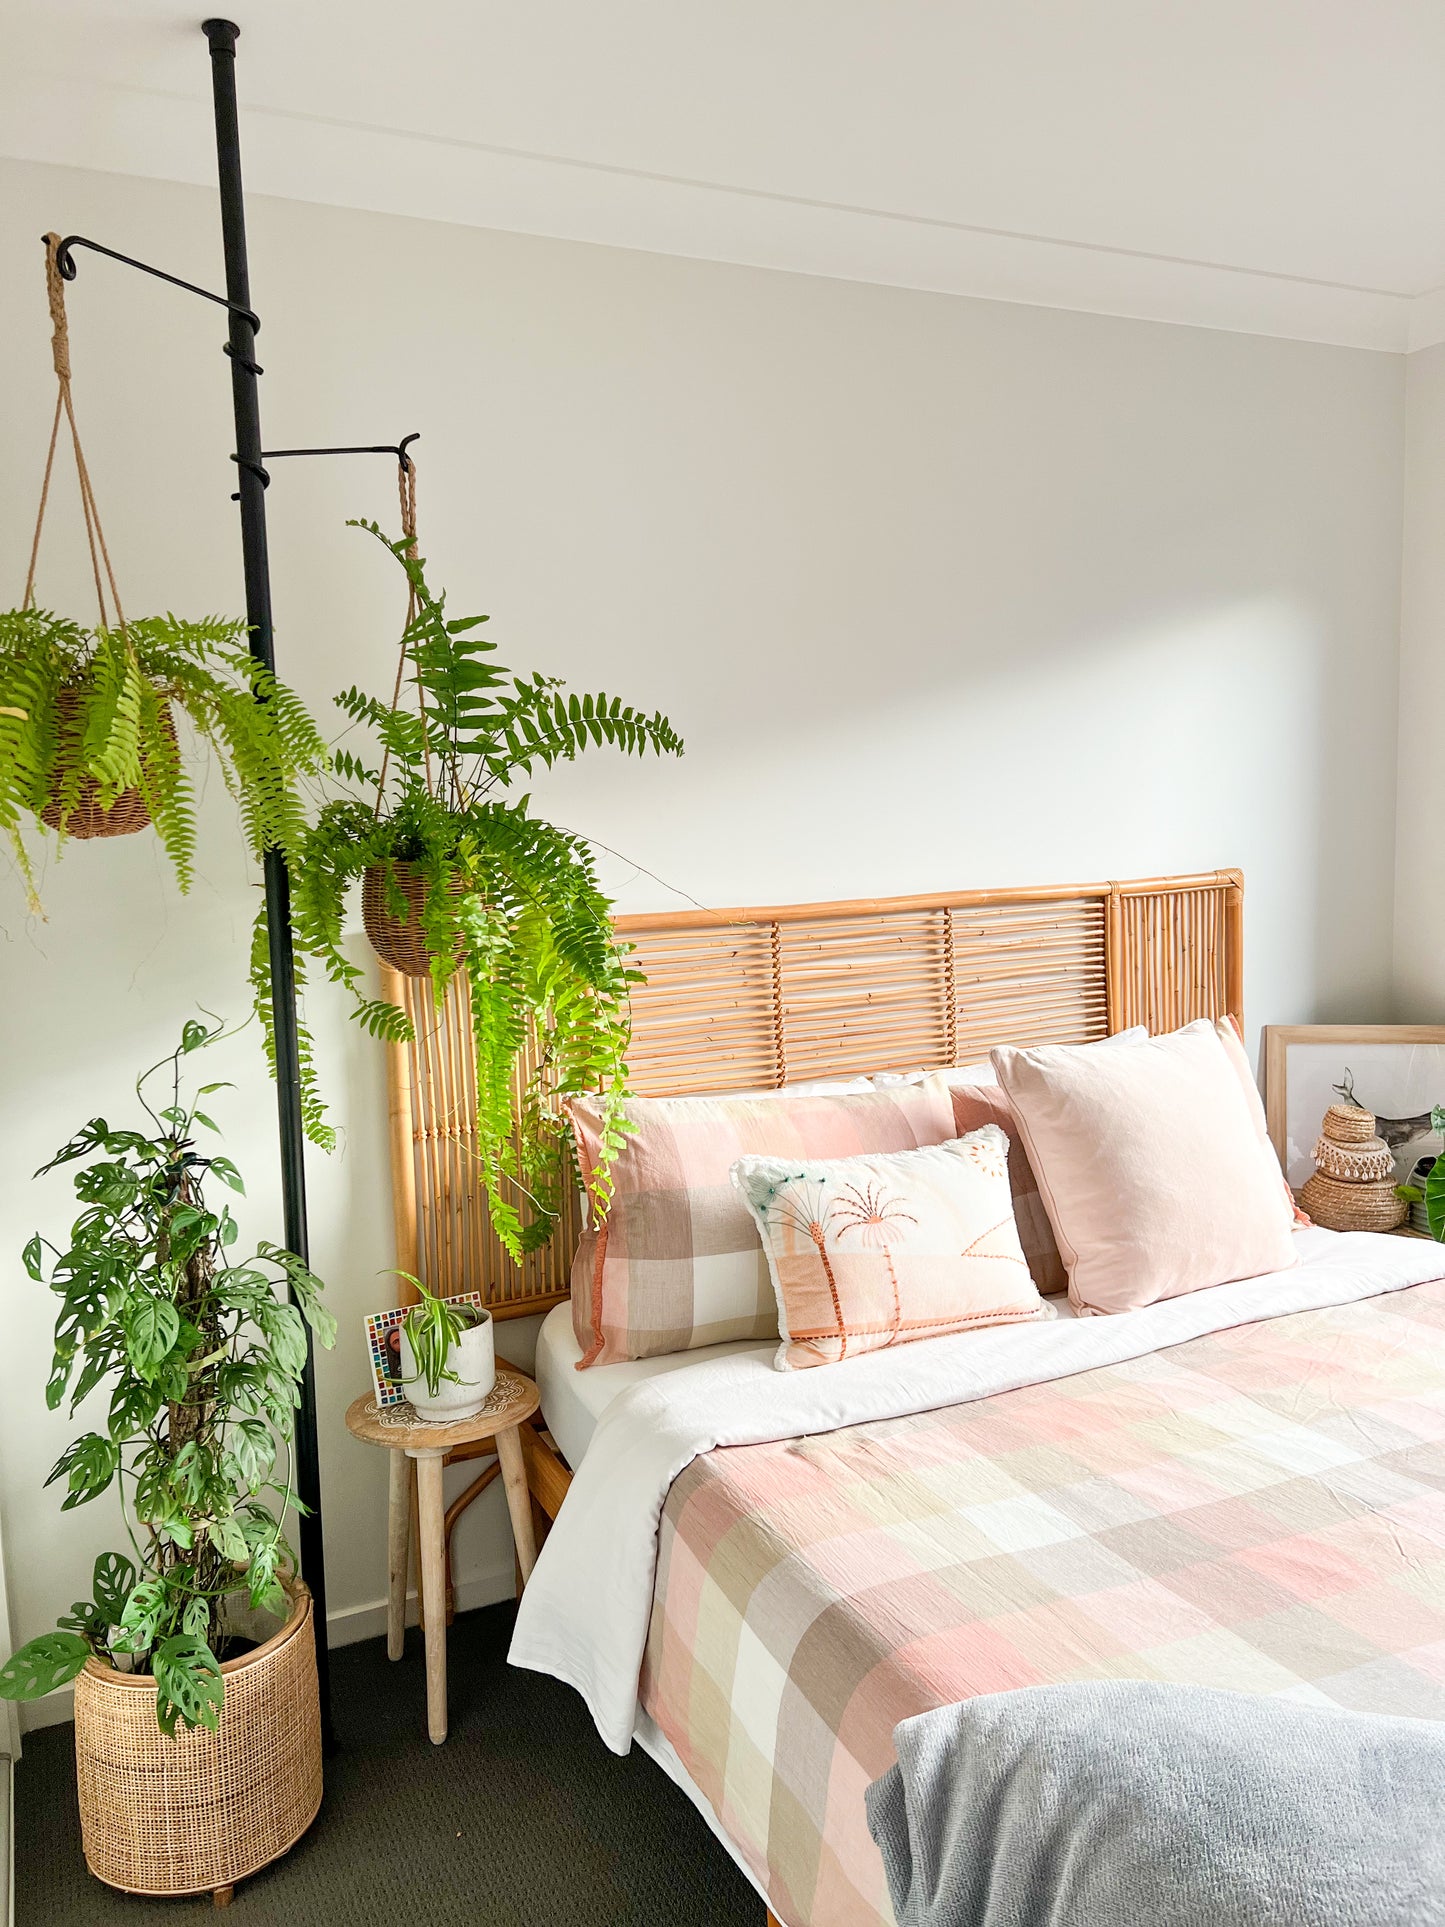 Tension plant pole with hanging planters featuring green ferns in bedroom